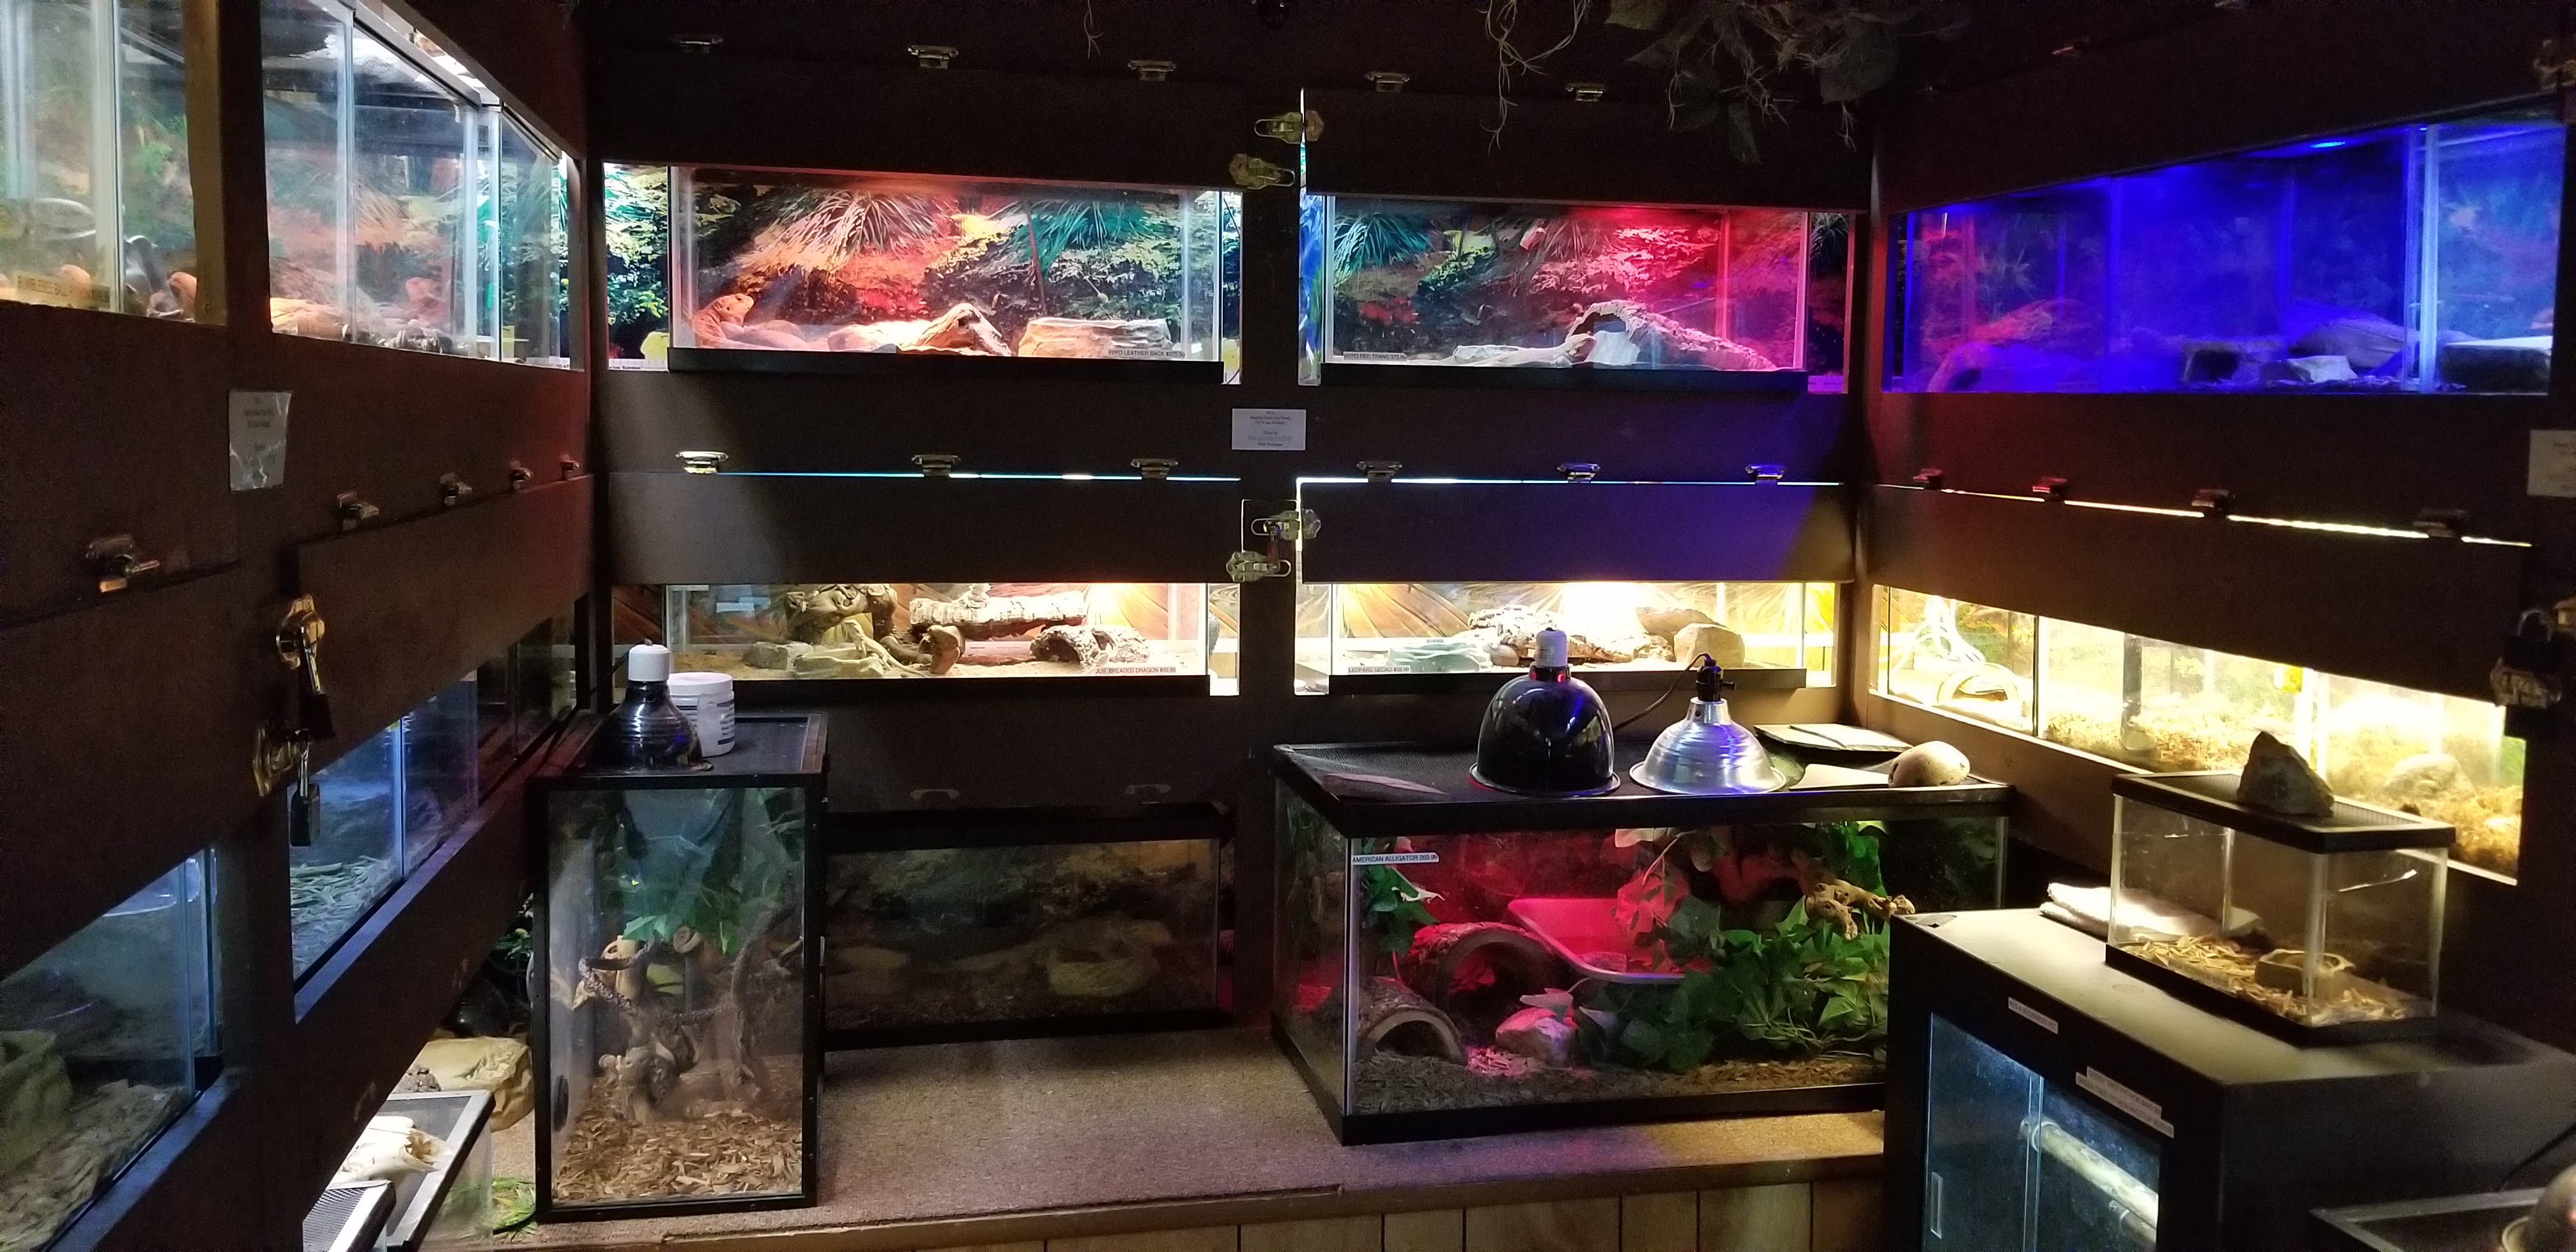 ZIMMERS REPTILE ROOM LARGEST IN THE AREA!